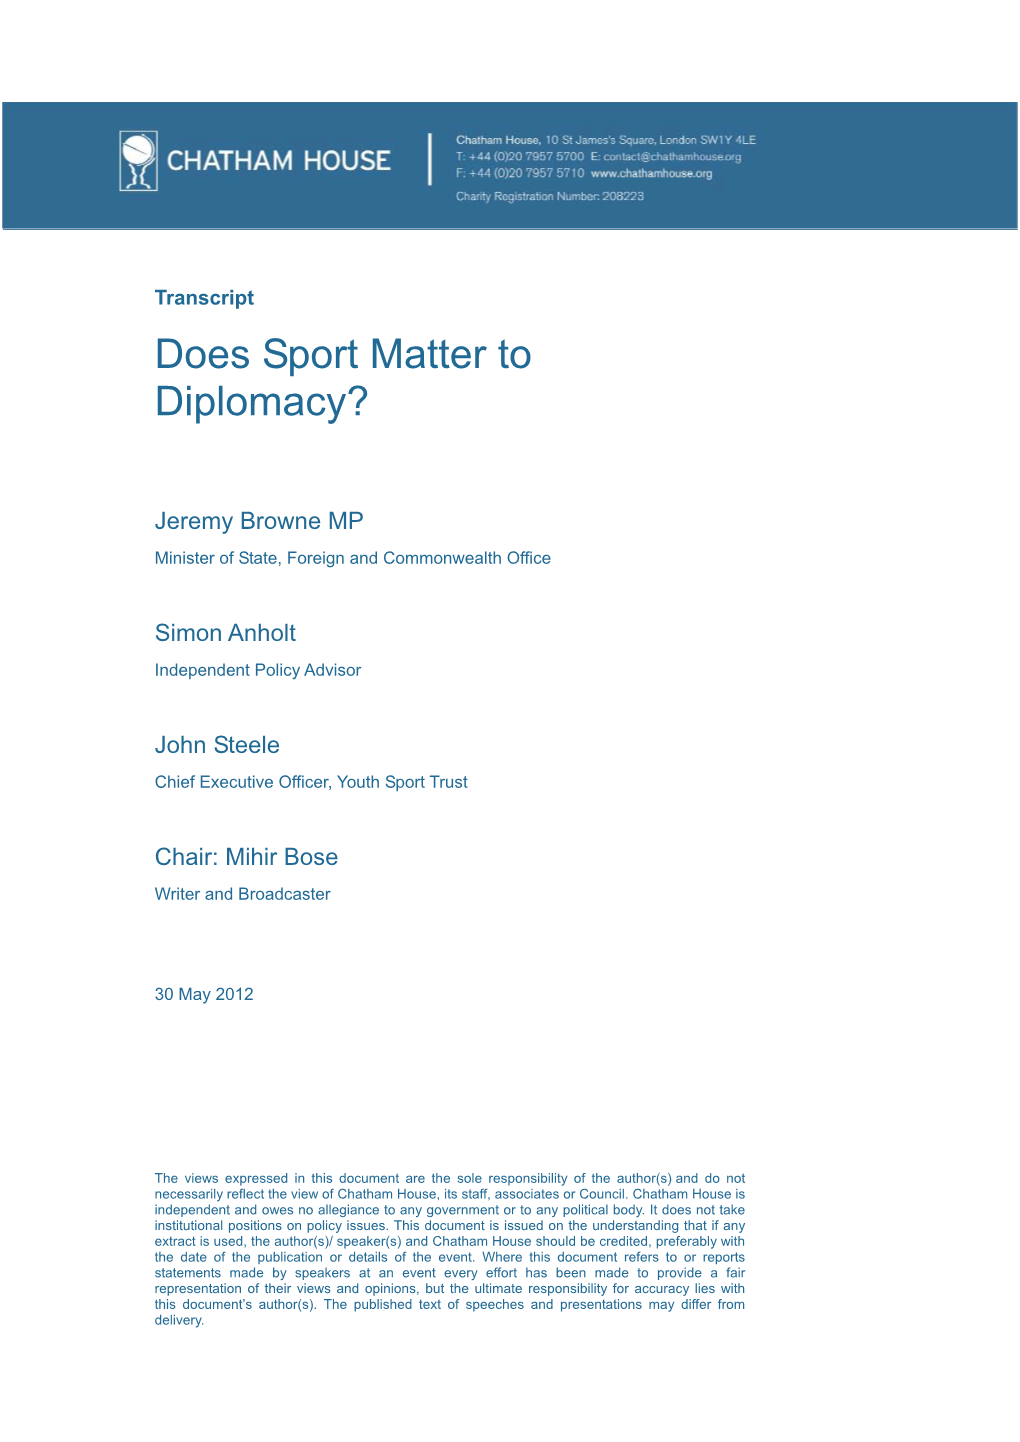 Does Sport Matter to Diplomacy?